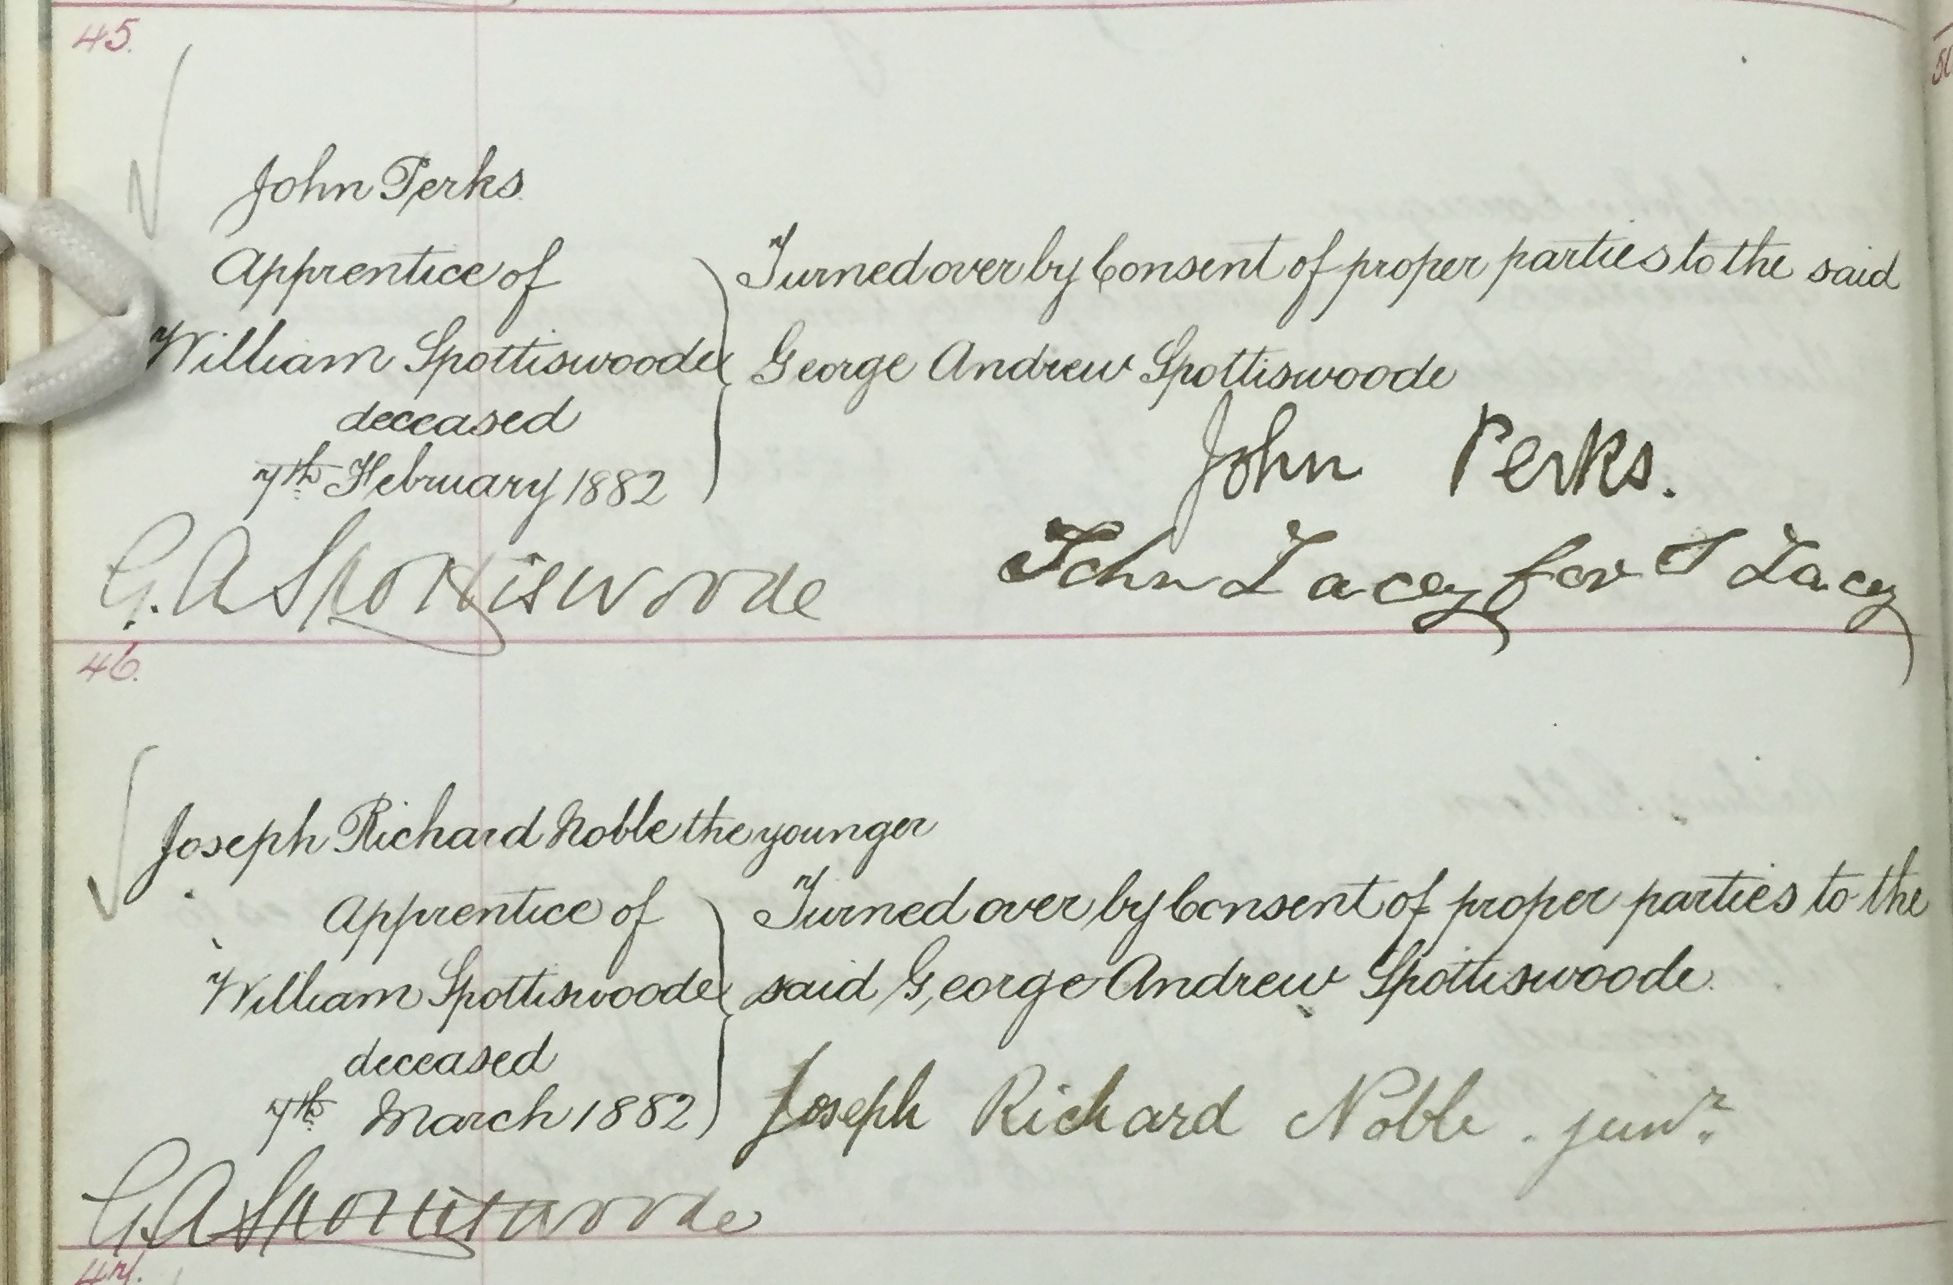 A sample of a Stationers' document